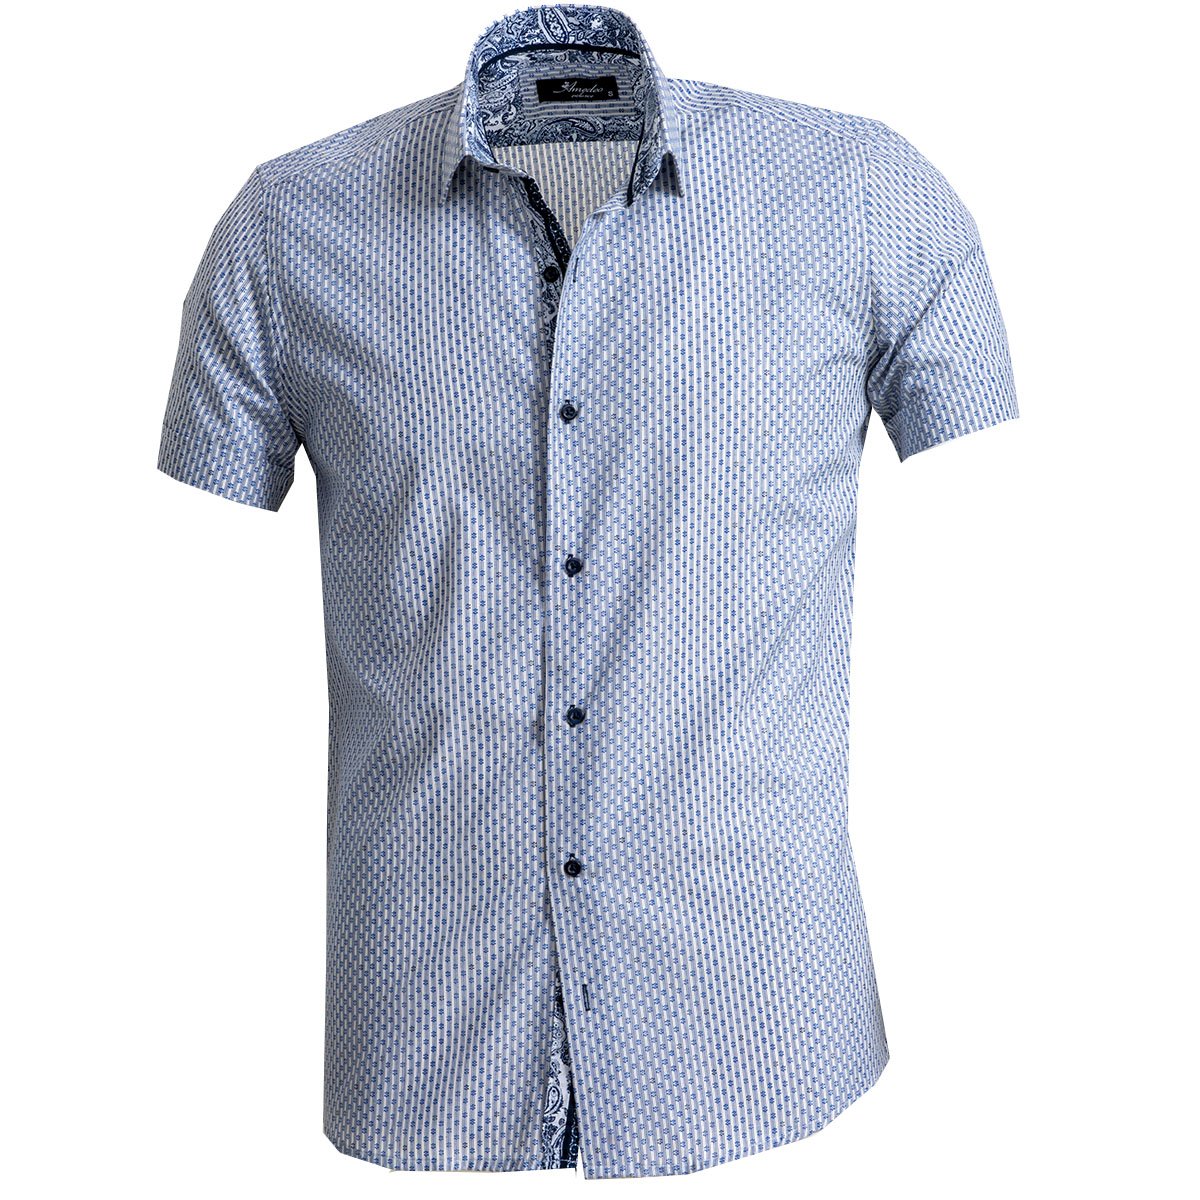 Men's Button down Tailor Fit Soft 100% Cotton Short Sleeve Dress Shirt Blue Grey casual And Formal - Amedeo Exclusive